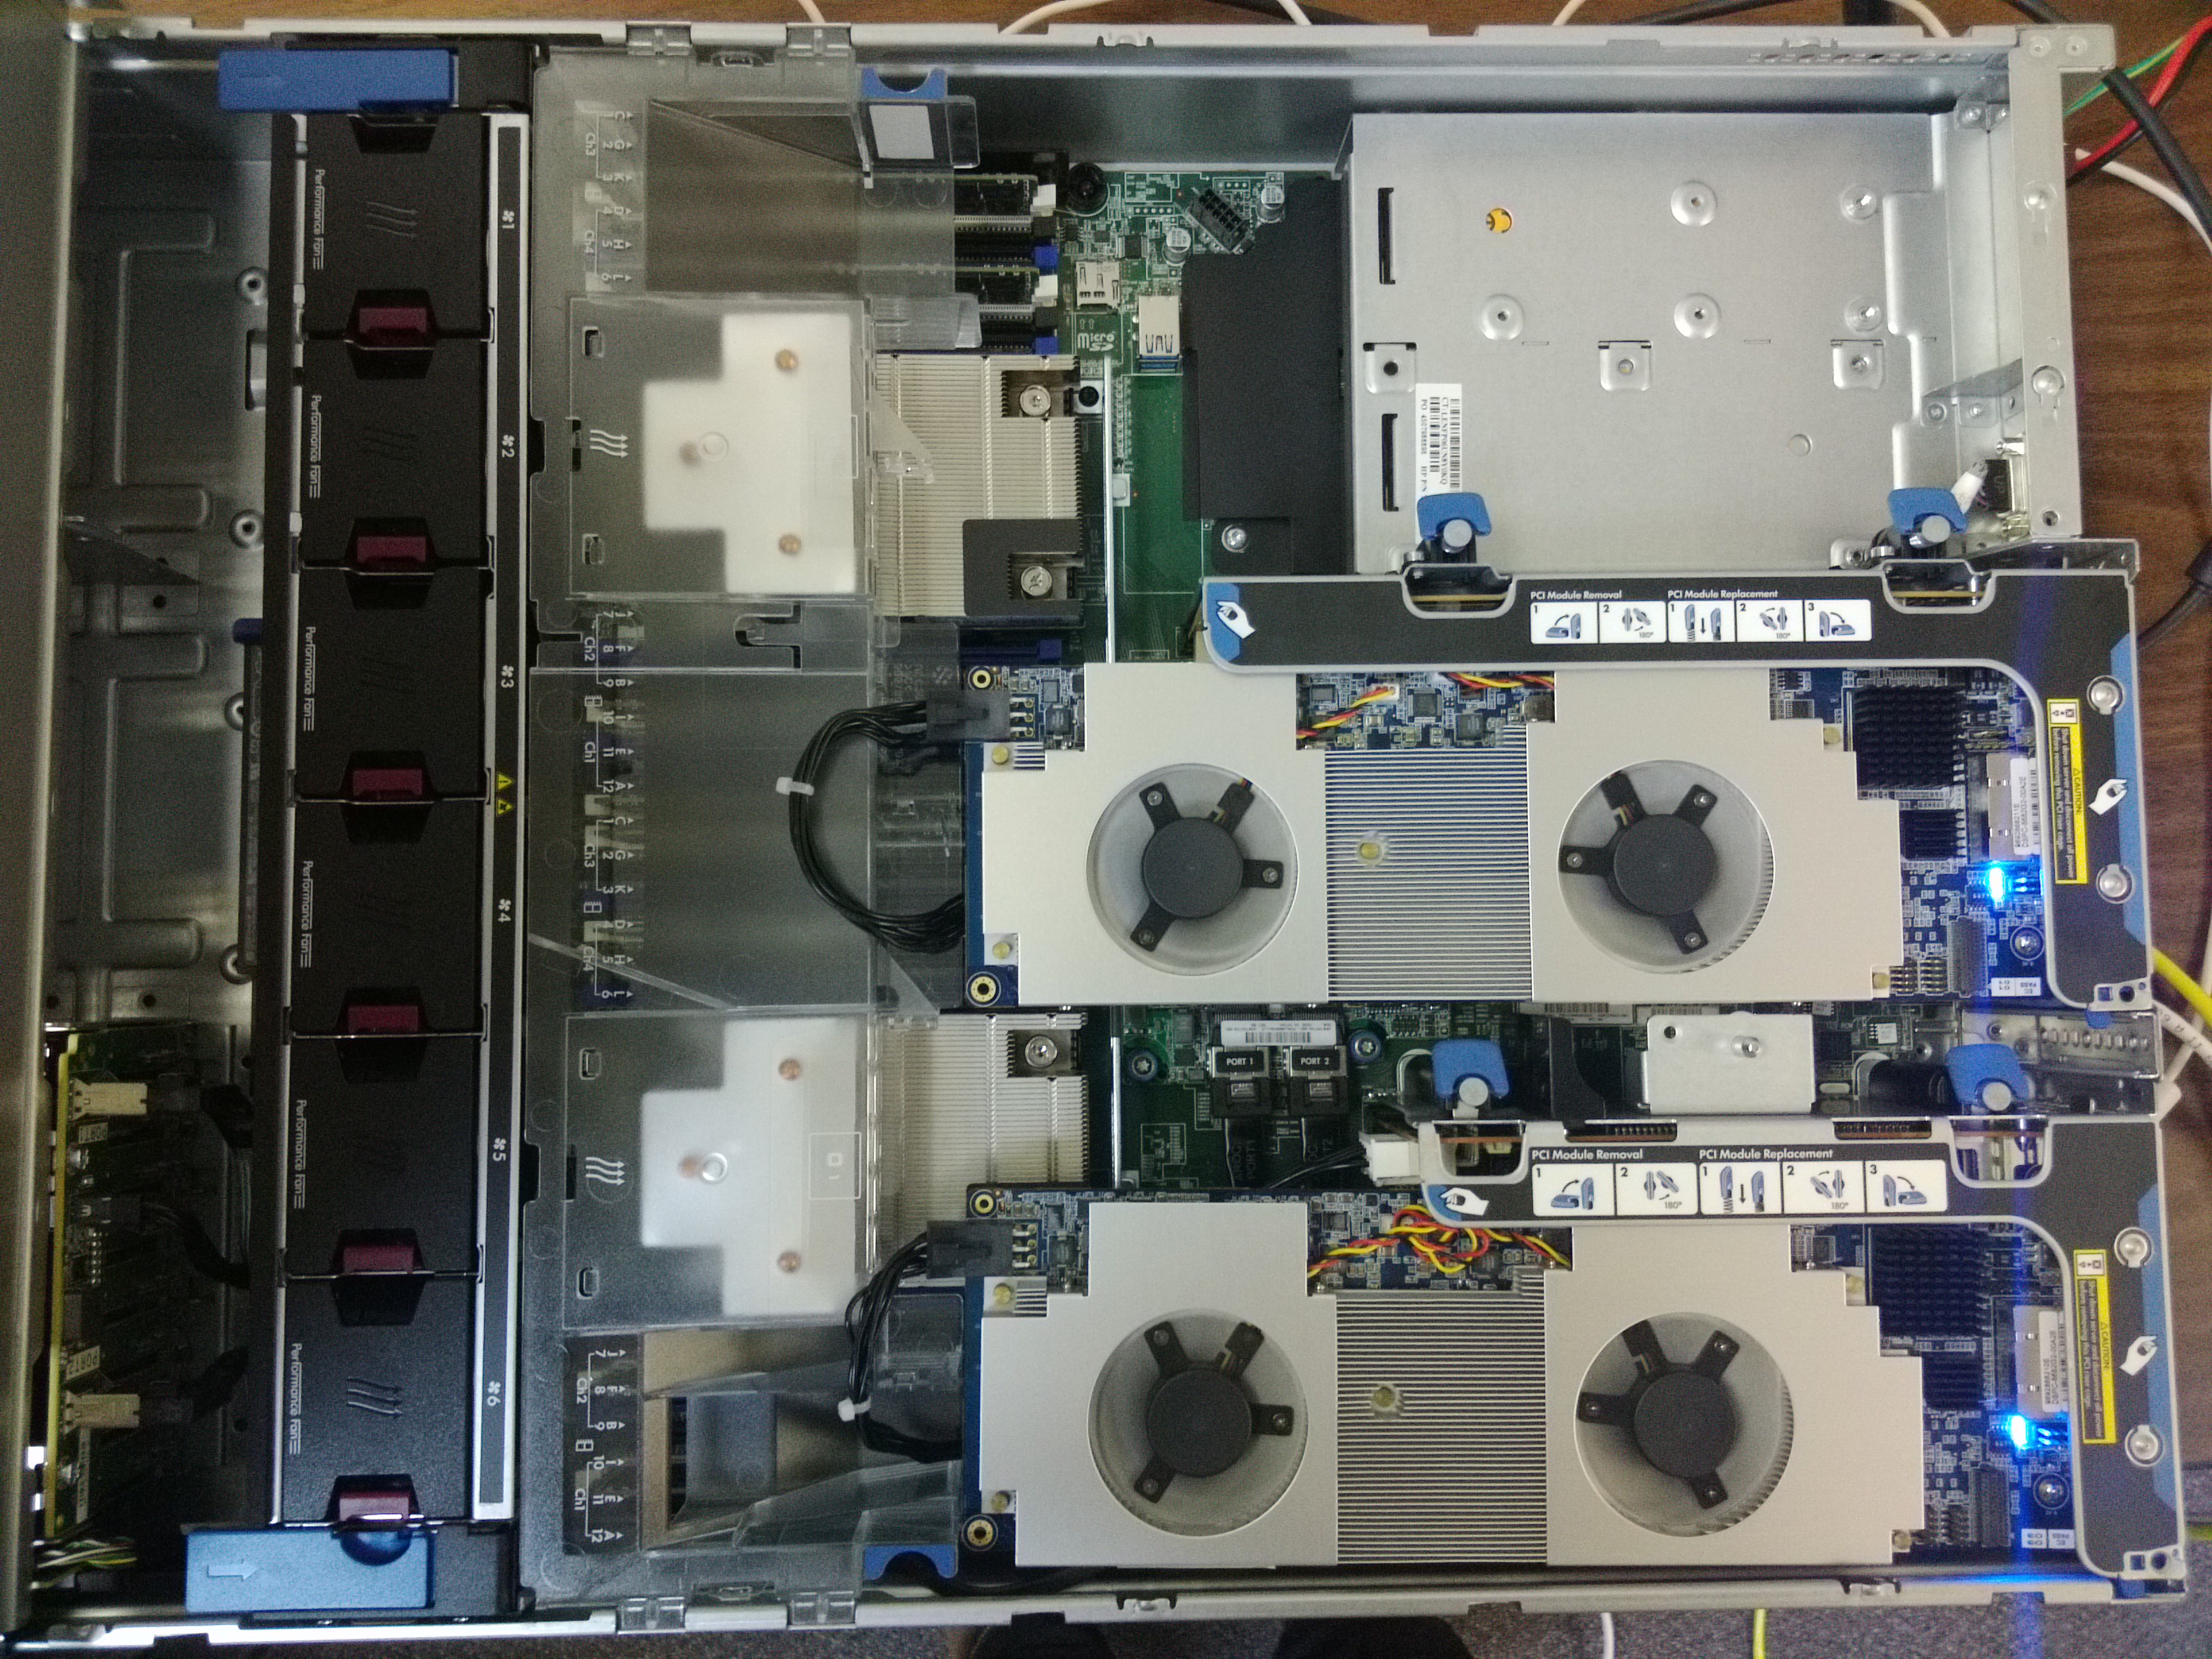 HP DL380 G9 with 128 c66x cores installed